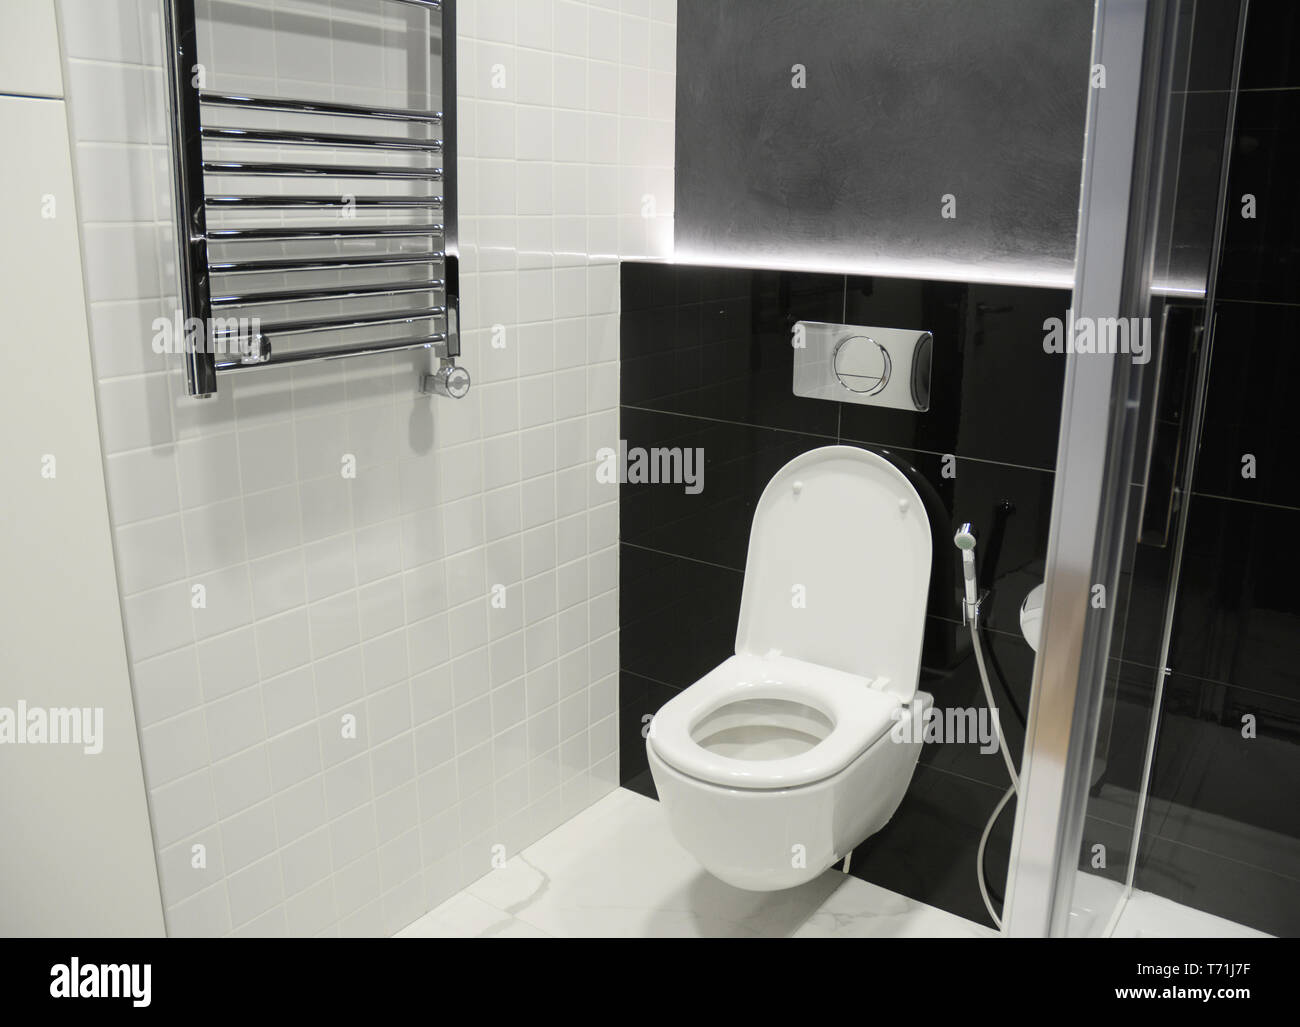 White toilet bowl with thermostatic electric towel rail for bathroom. Stock Photo